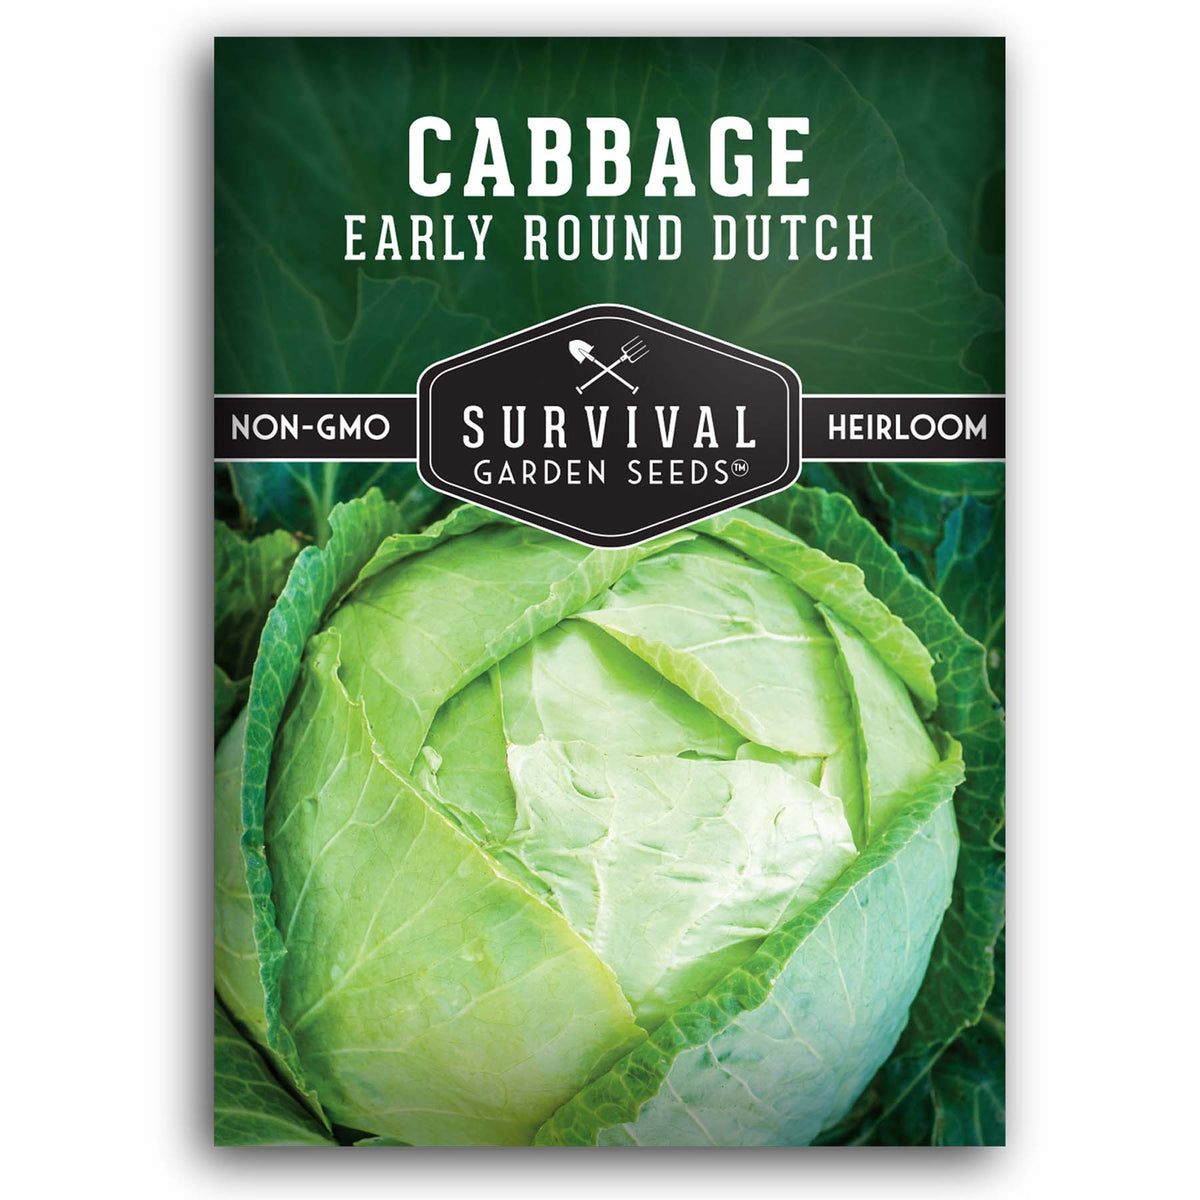 Early Round Dutch Cabbage seed for planting